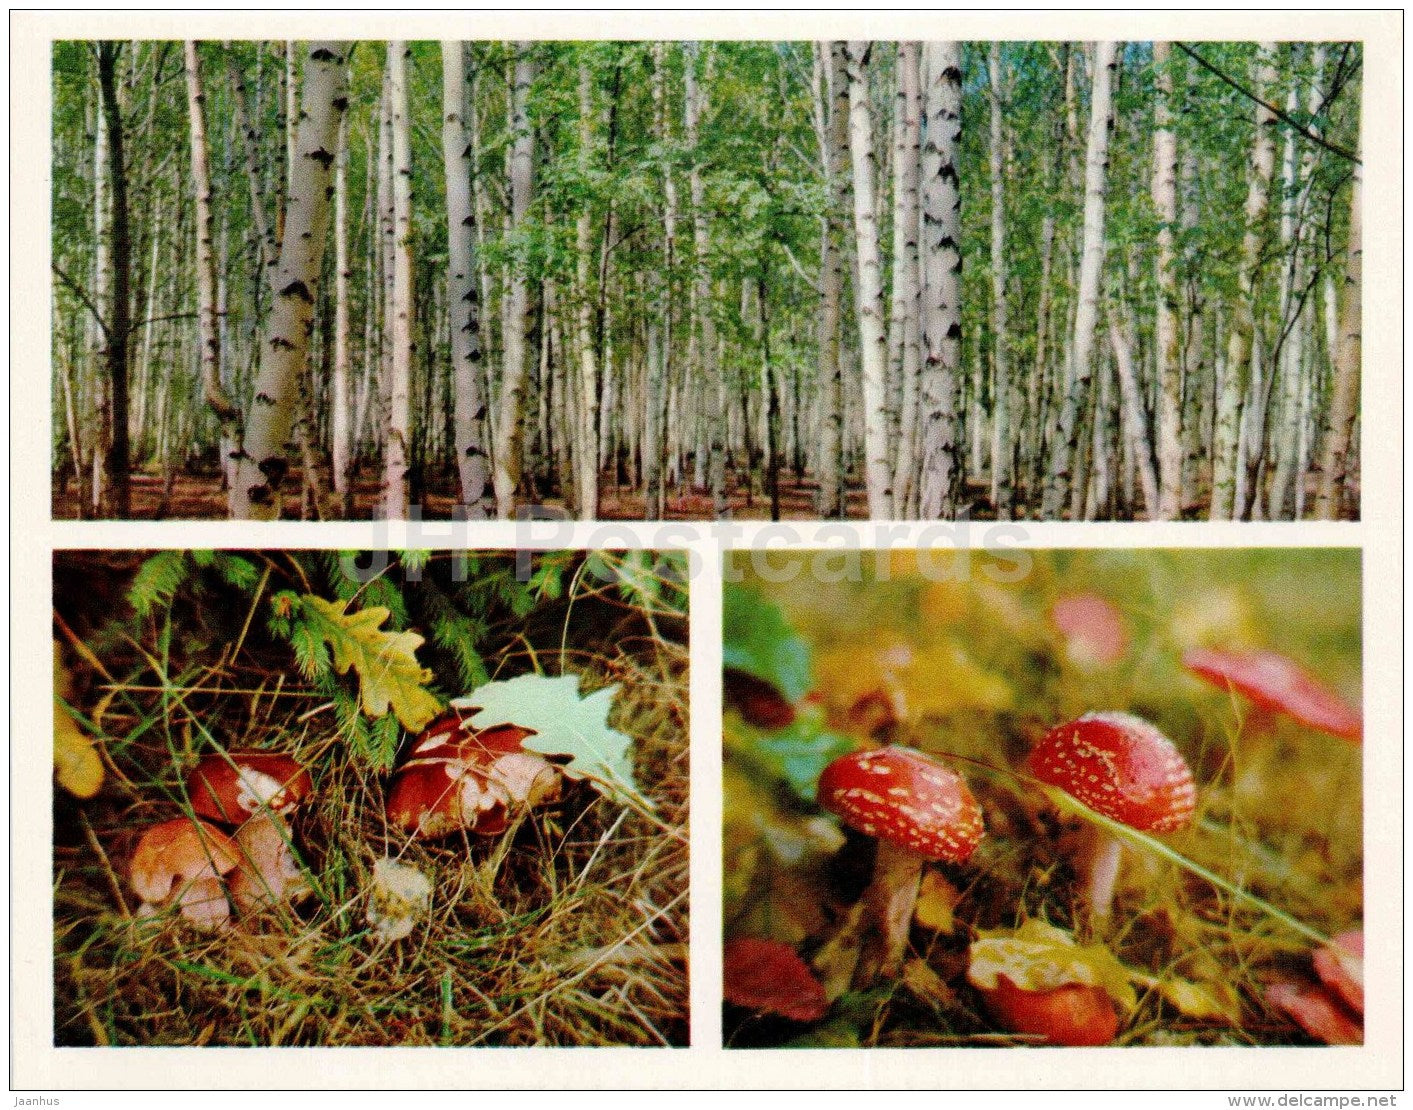 mushrooms - toadstool - birch forest - Nature Encounter - 1973 - Russia USSR - unused - JH Postcards